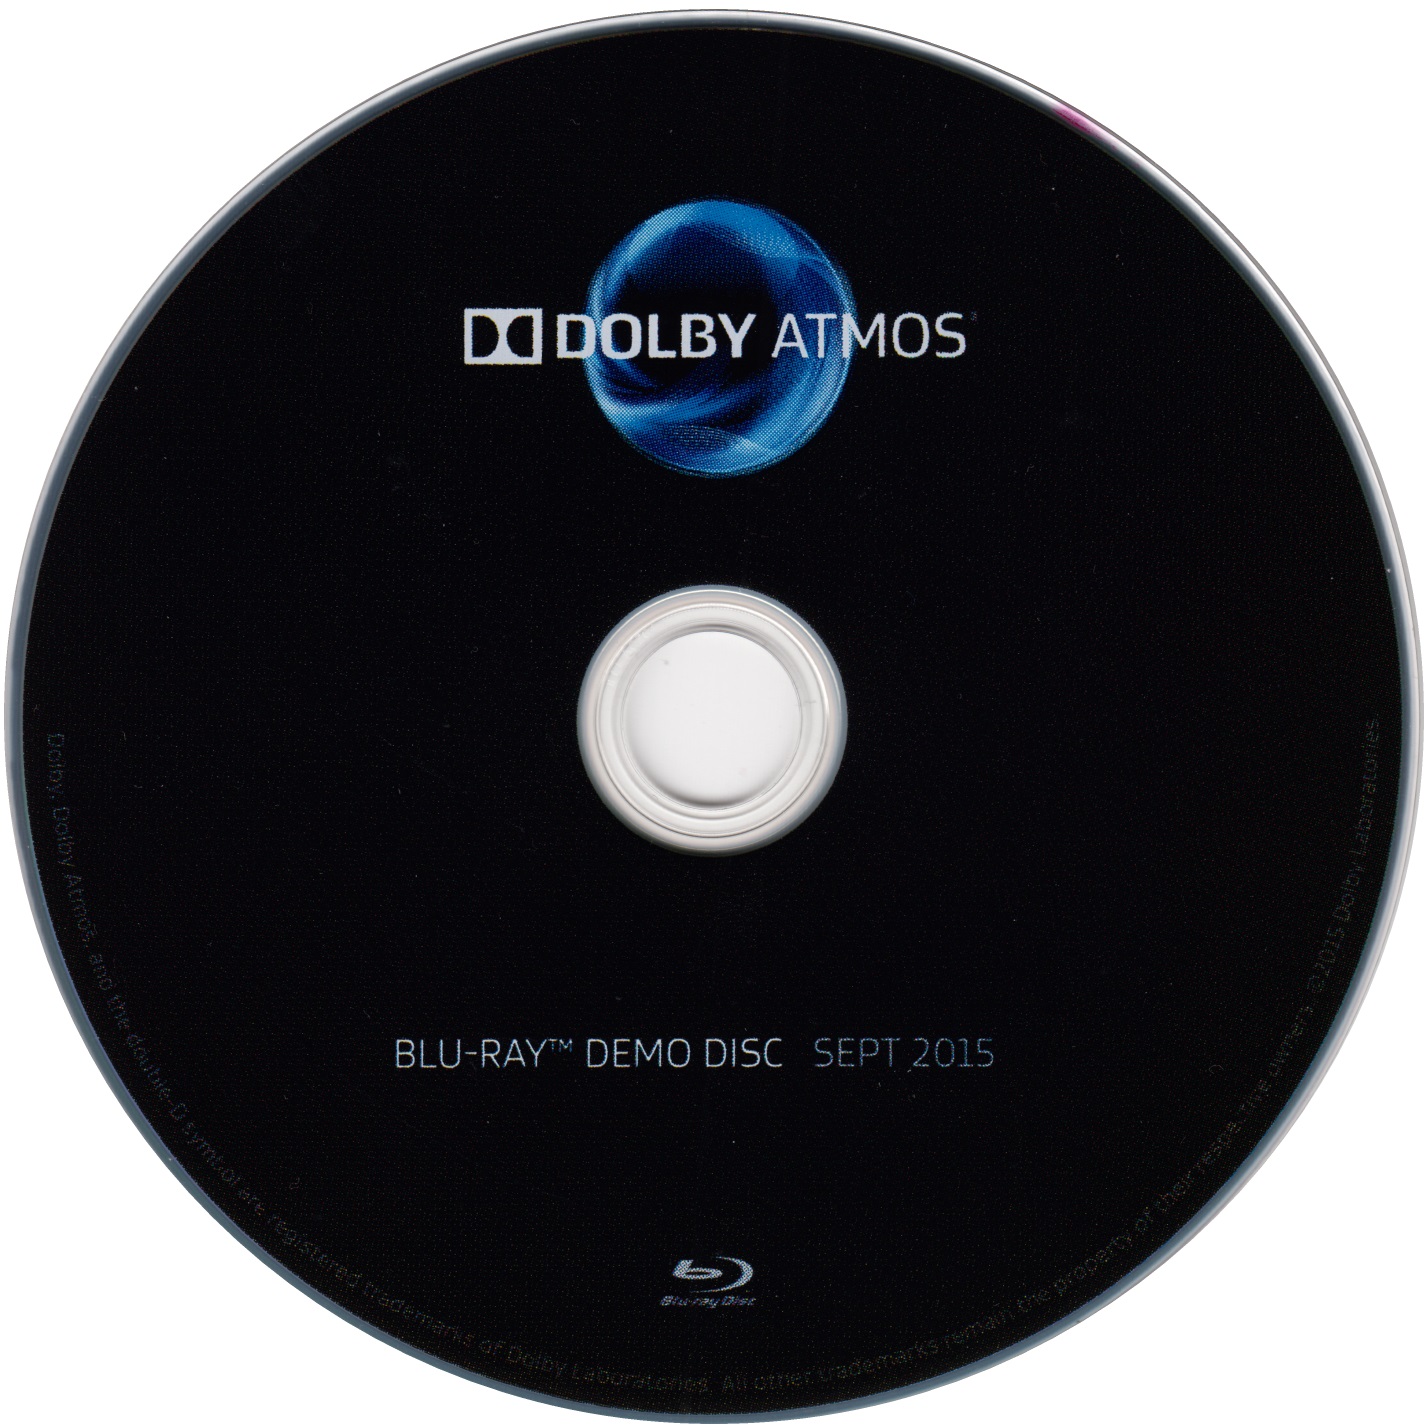 dolby atmos tamil songs free download